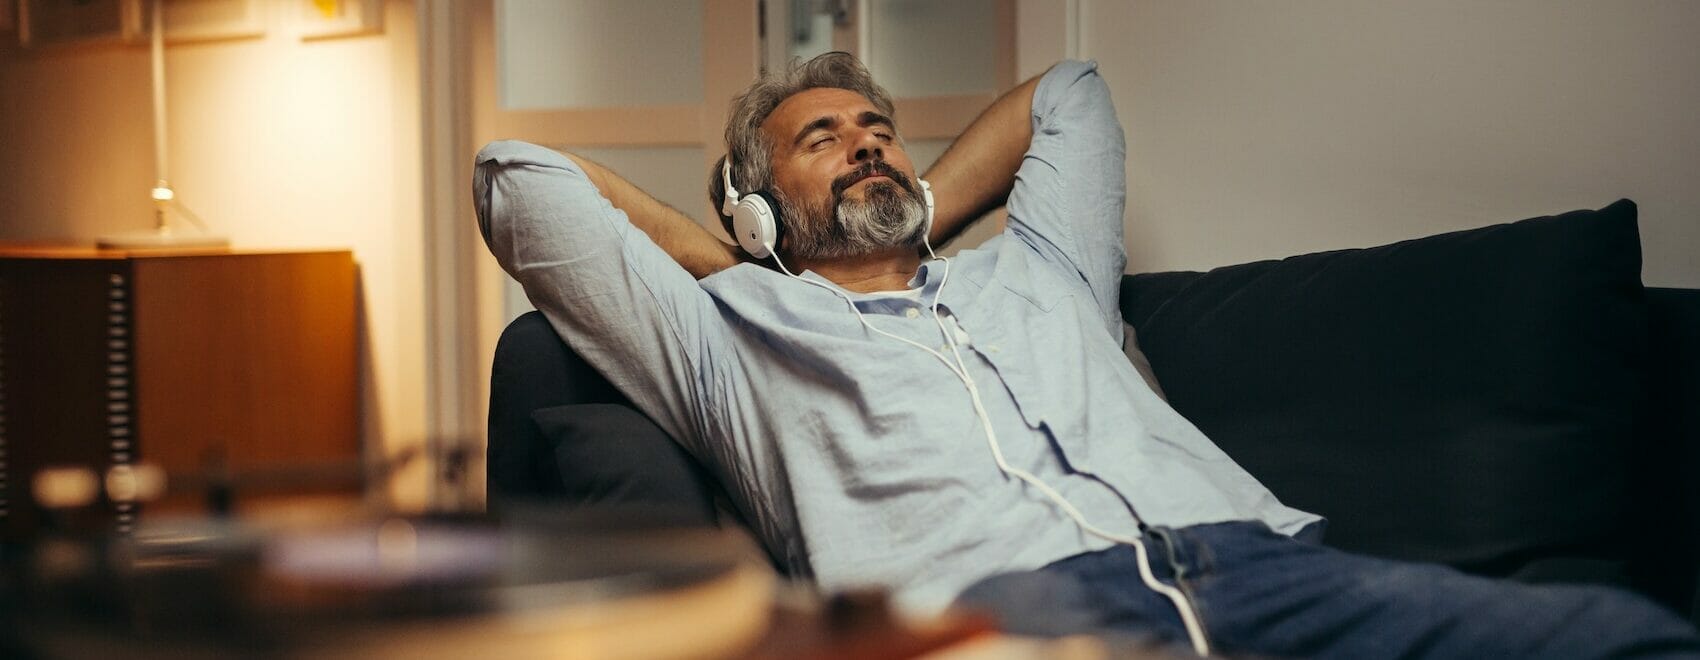 man listening music with headphones relaxed in sofa